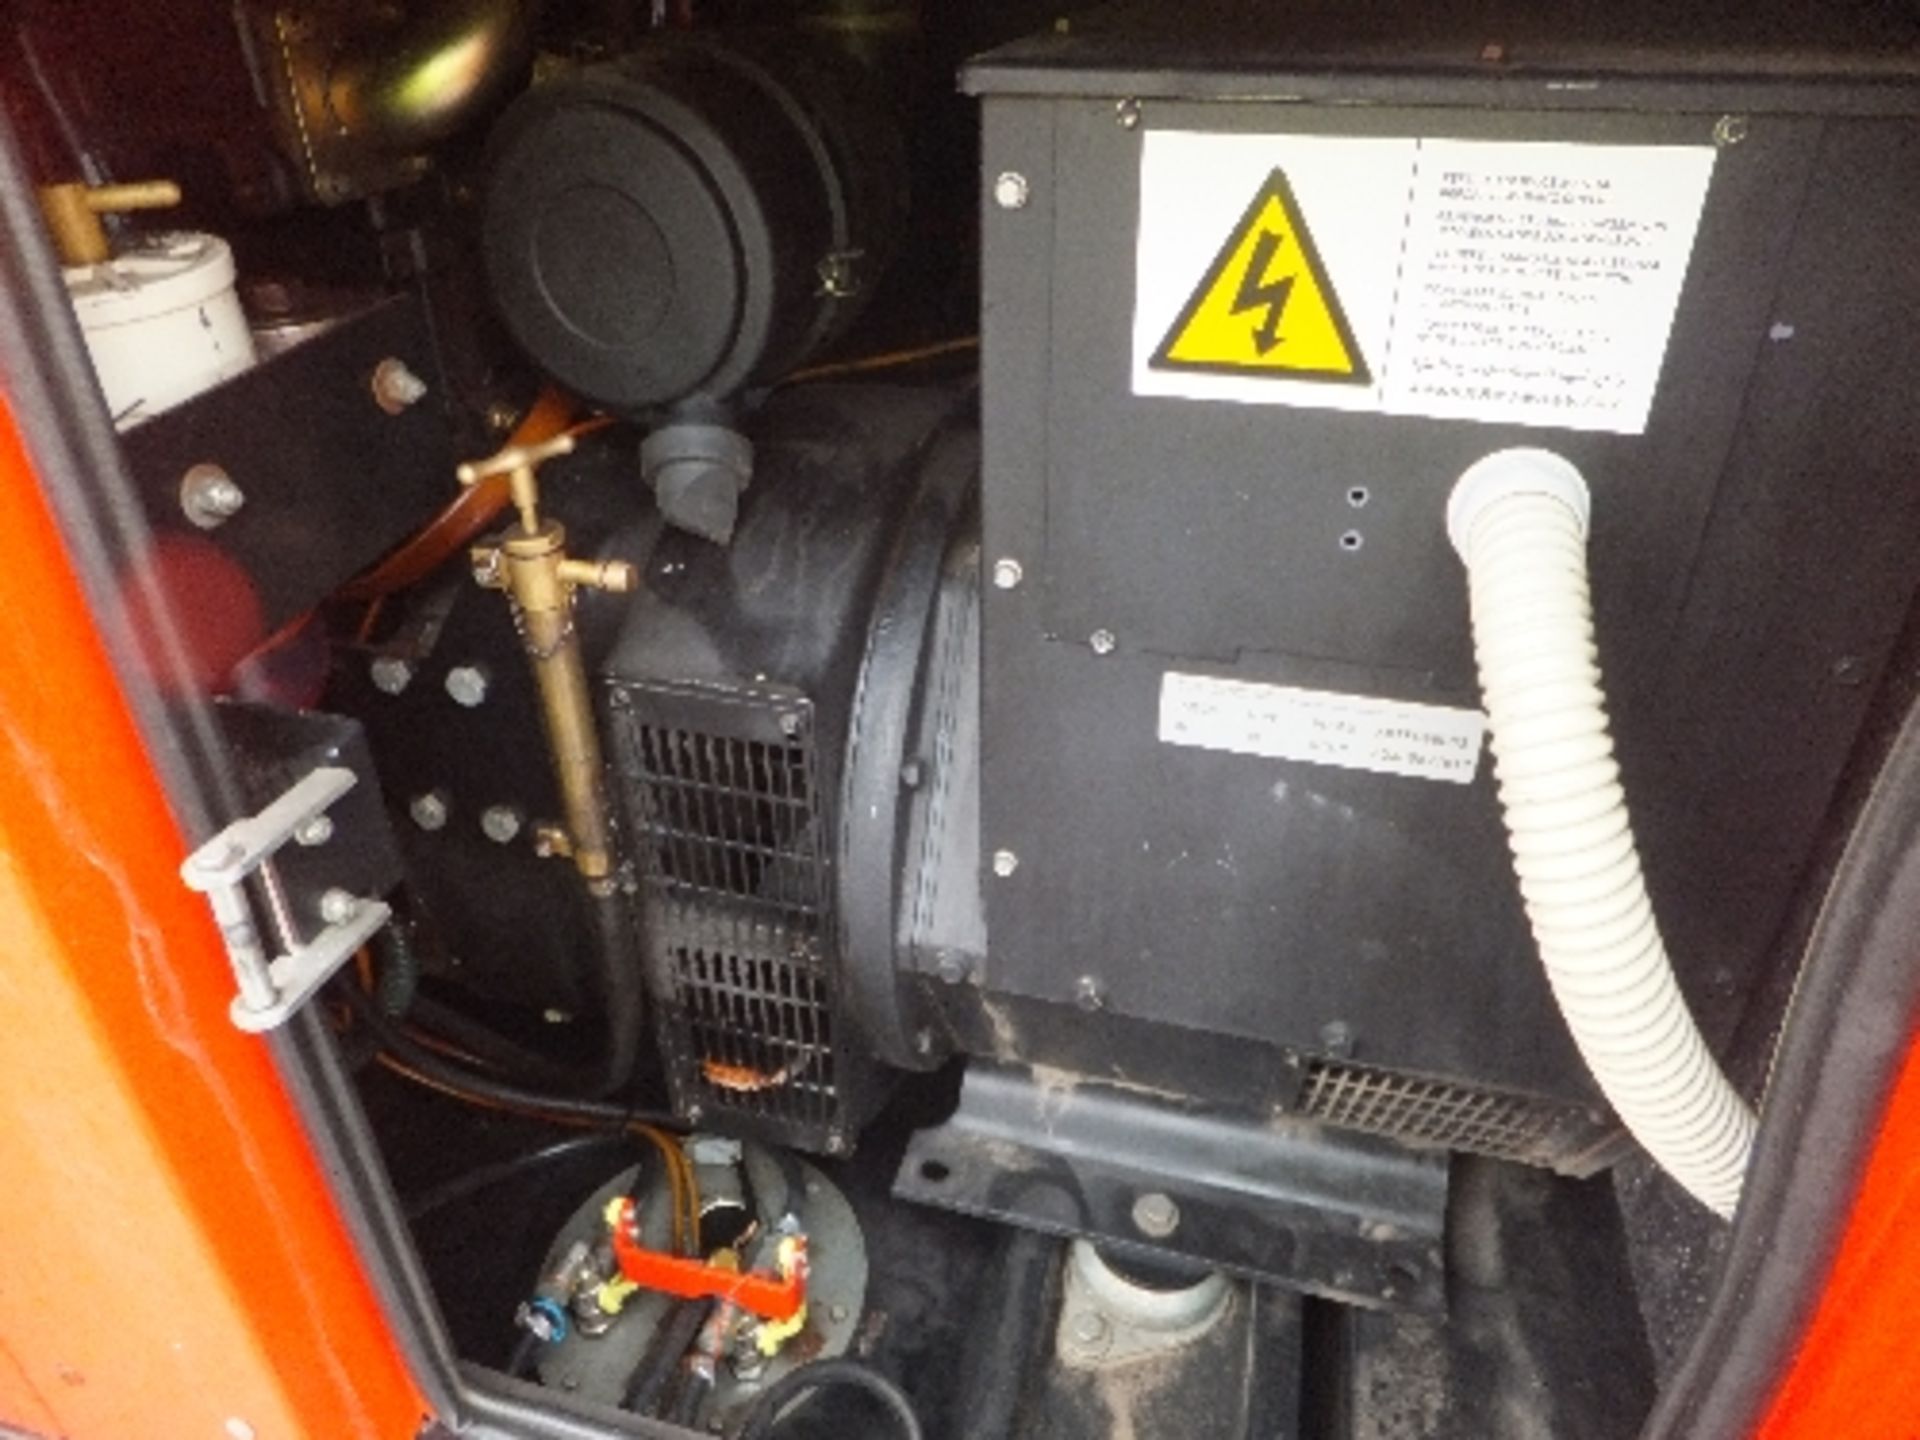 Genset MG50SSP generator 15838 hrs - fuel leak This lot is sold on instruction of Speedy - Image 5 of 5